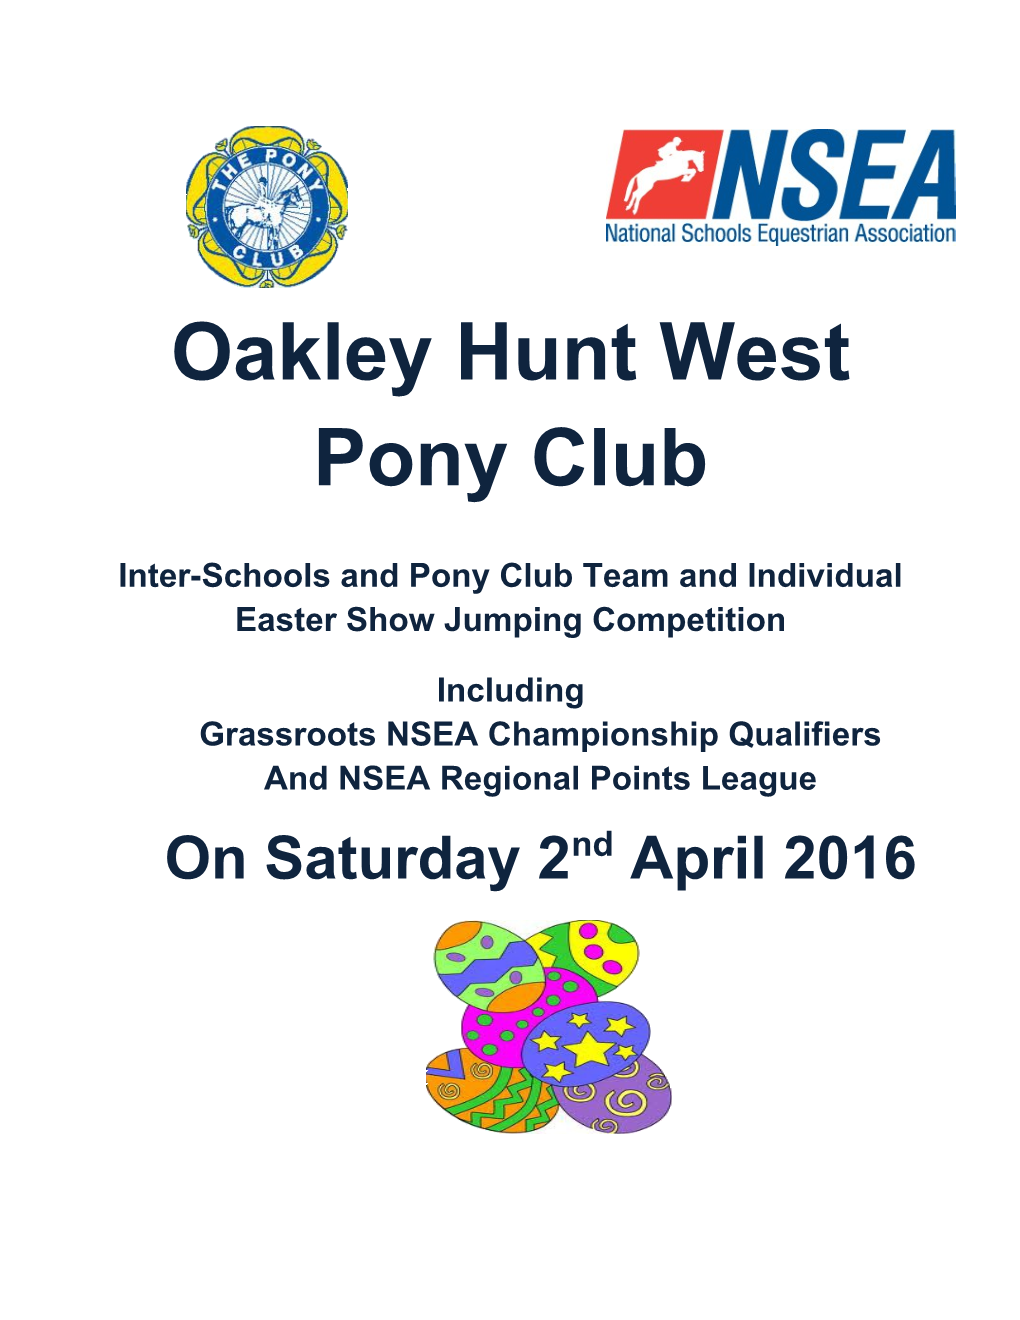 Inter-Schools and Pony Club Team and Individual